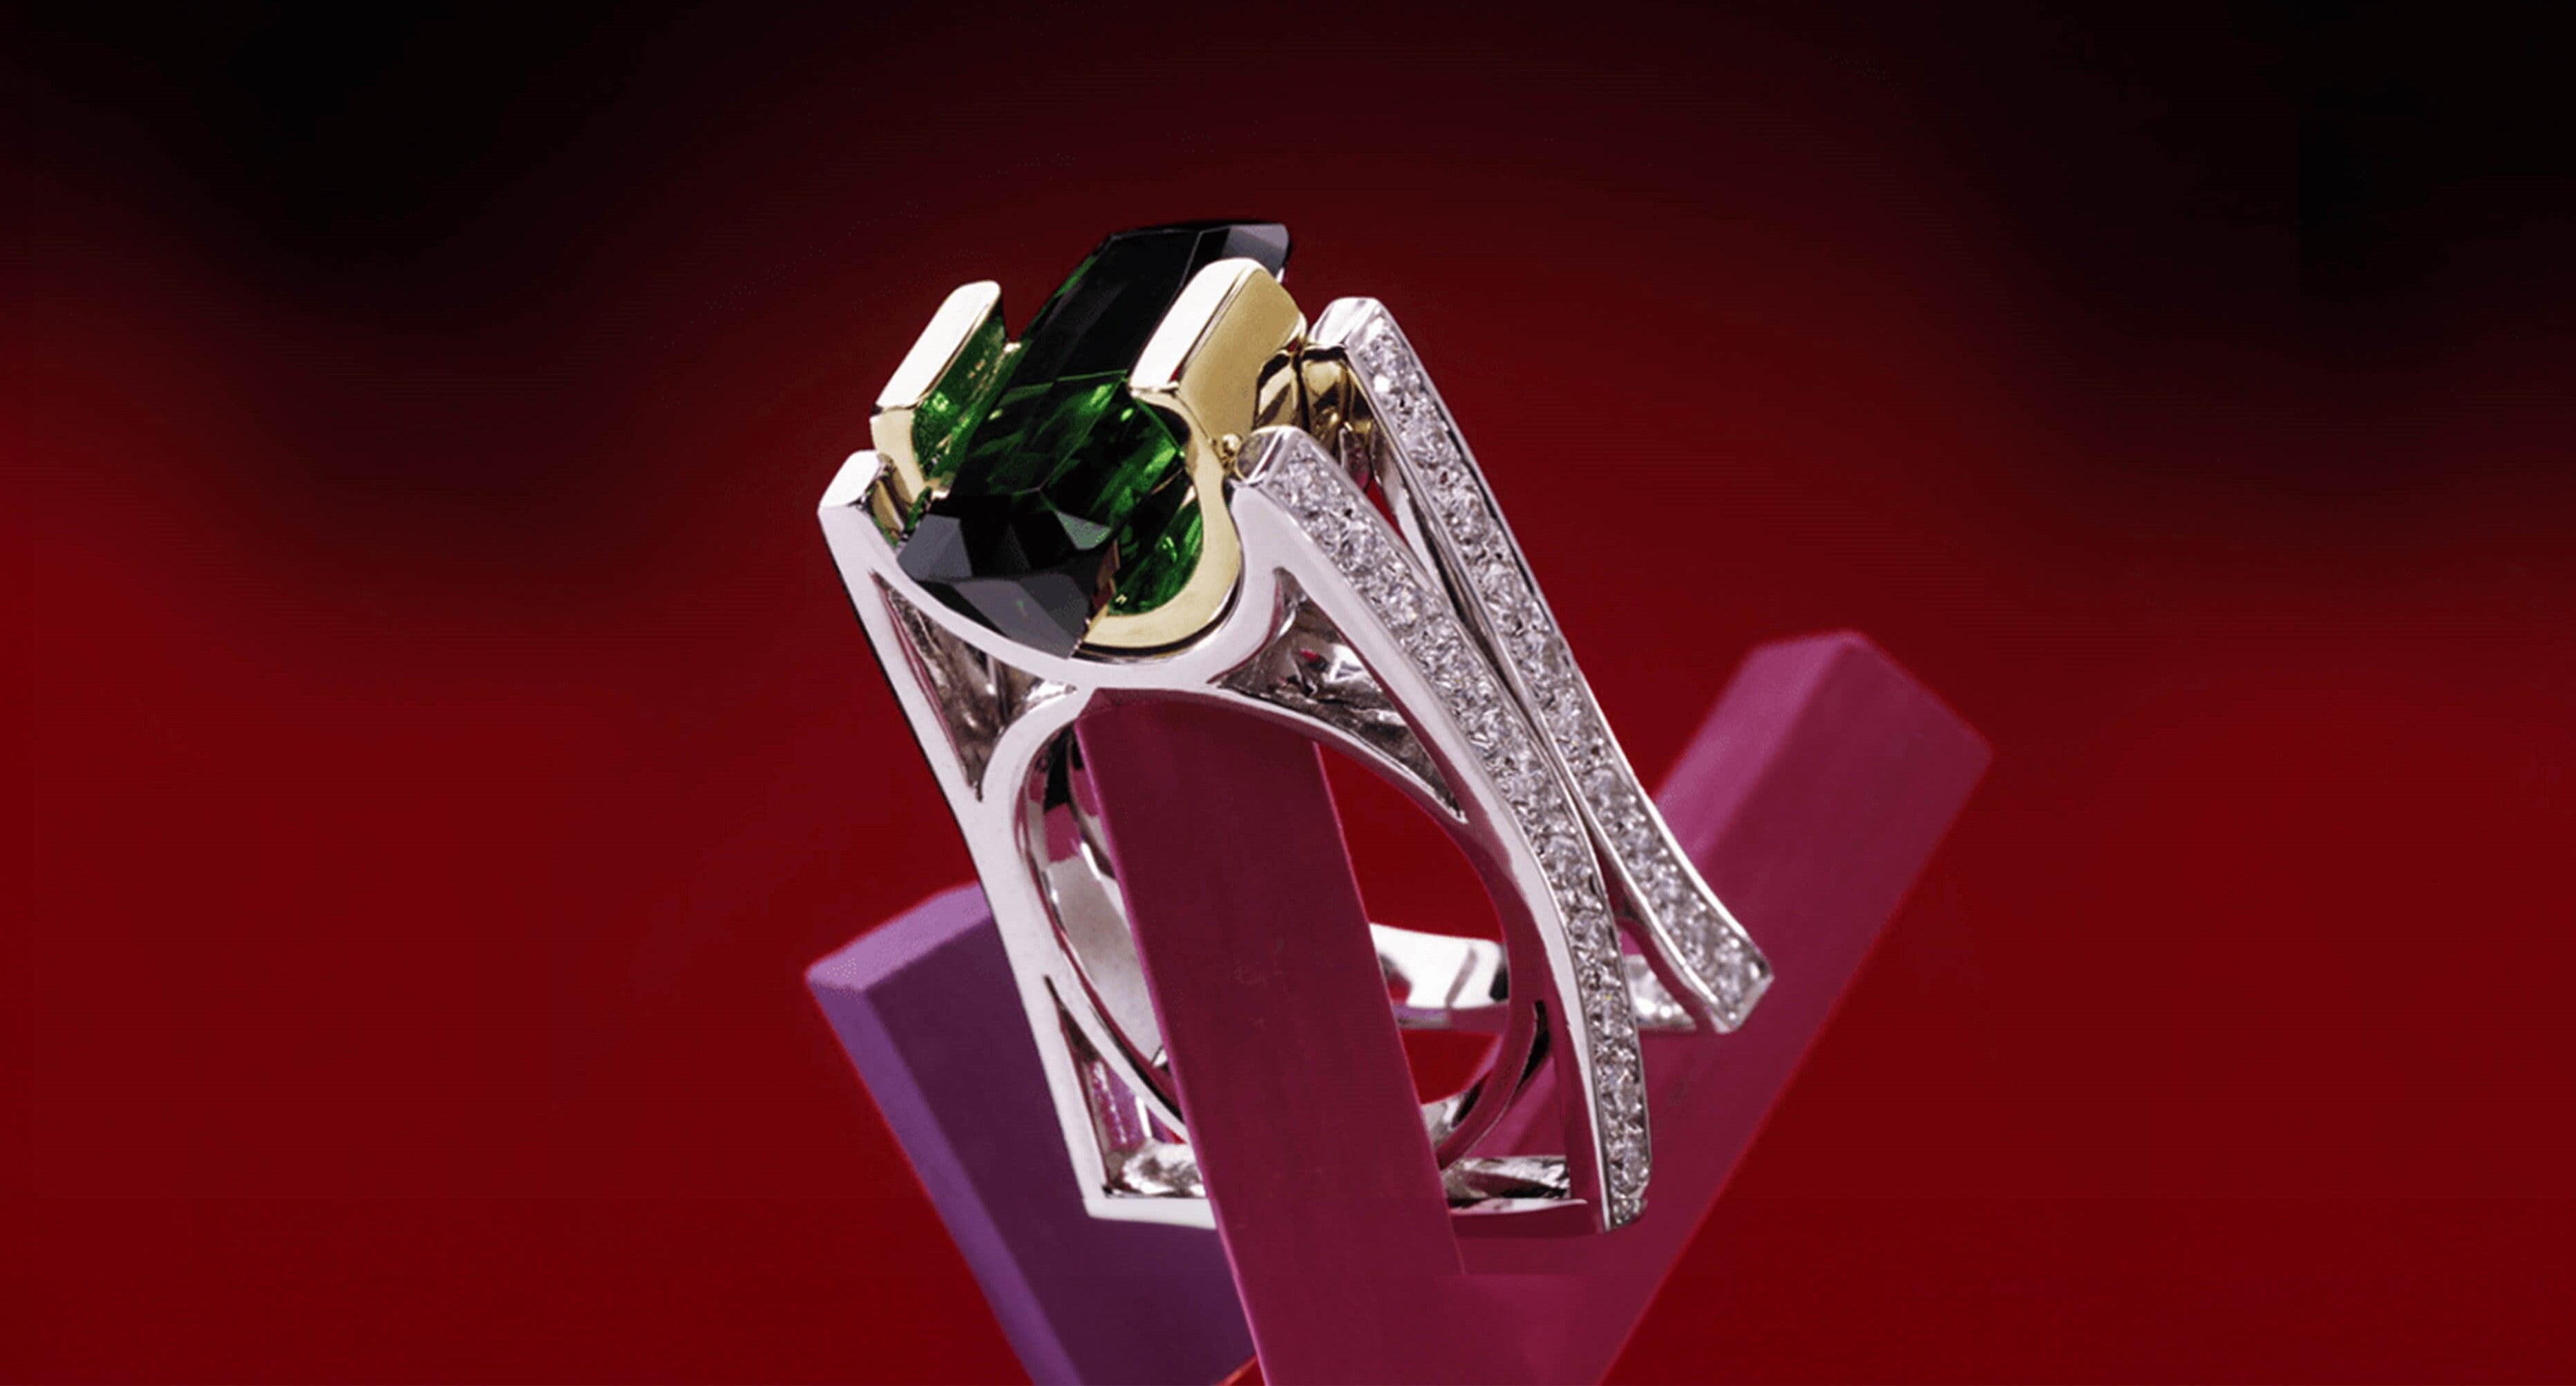 A custom-designed white gold ring with a prominent green emerald, showcased against a red background.